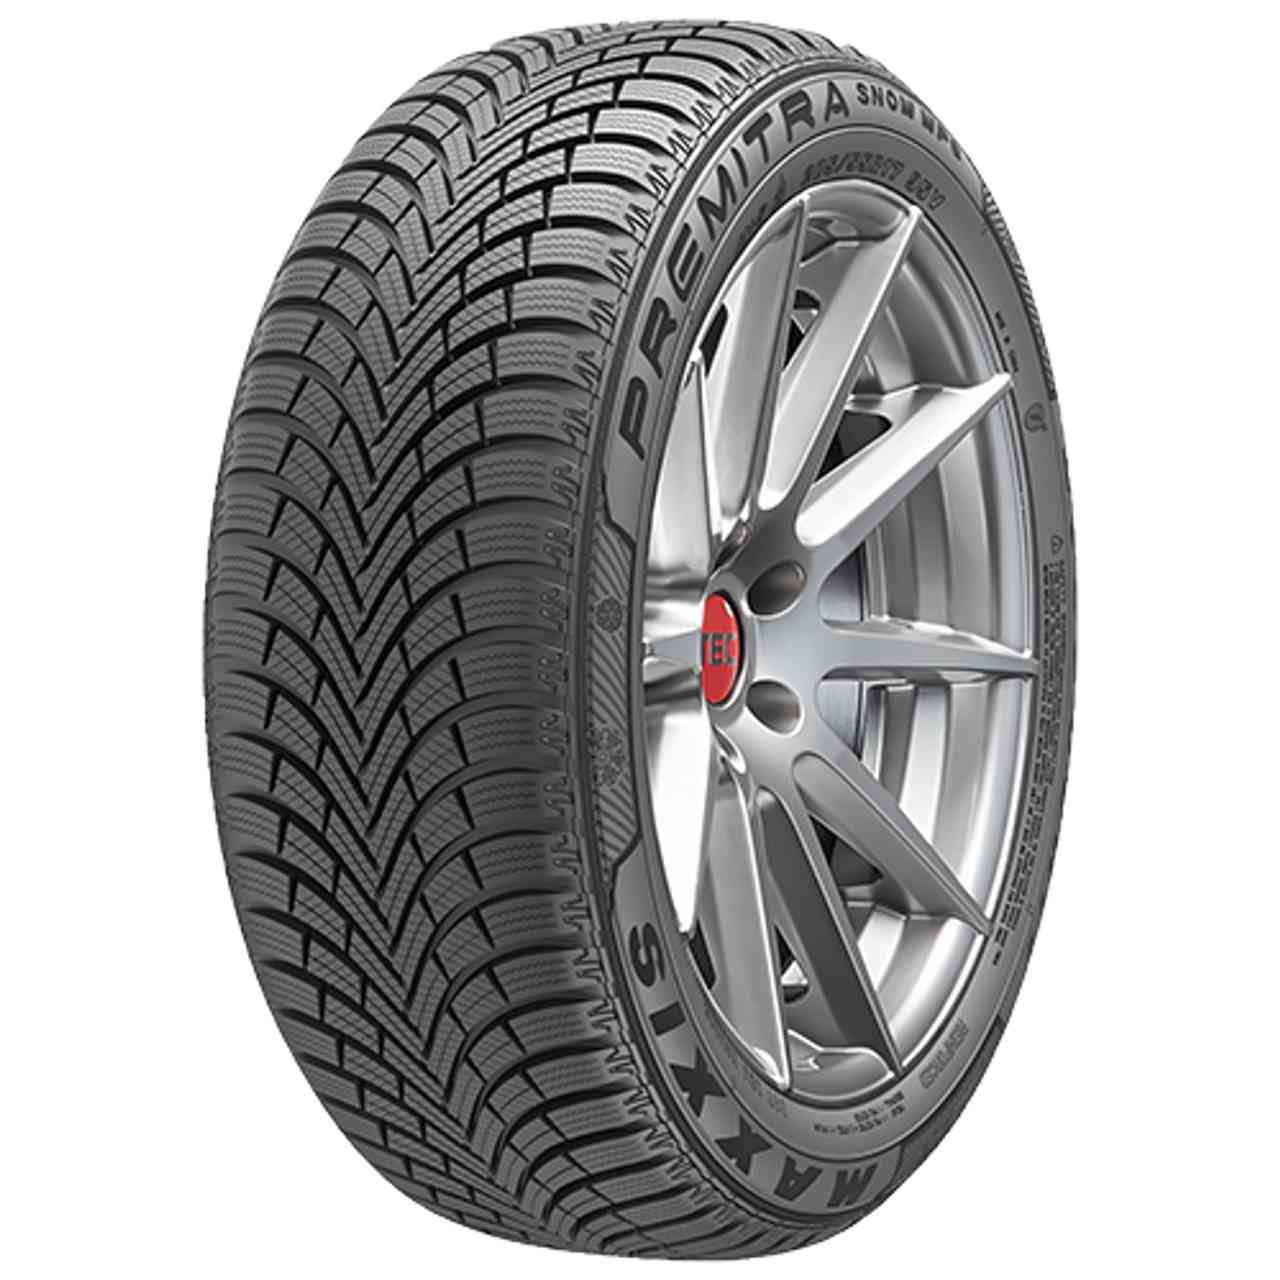 MAXXIS PREMITRA SNOW WP6 205/60R16 96H BSW von MAXXIS